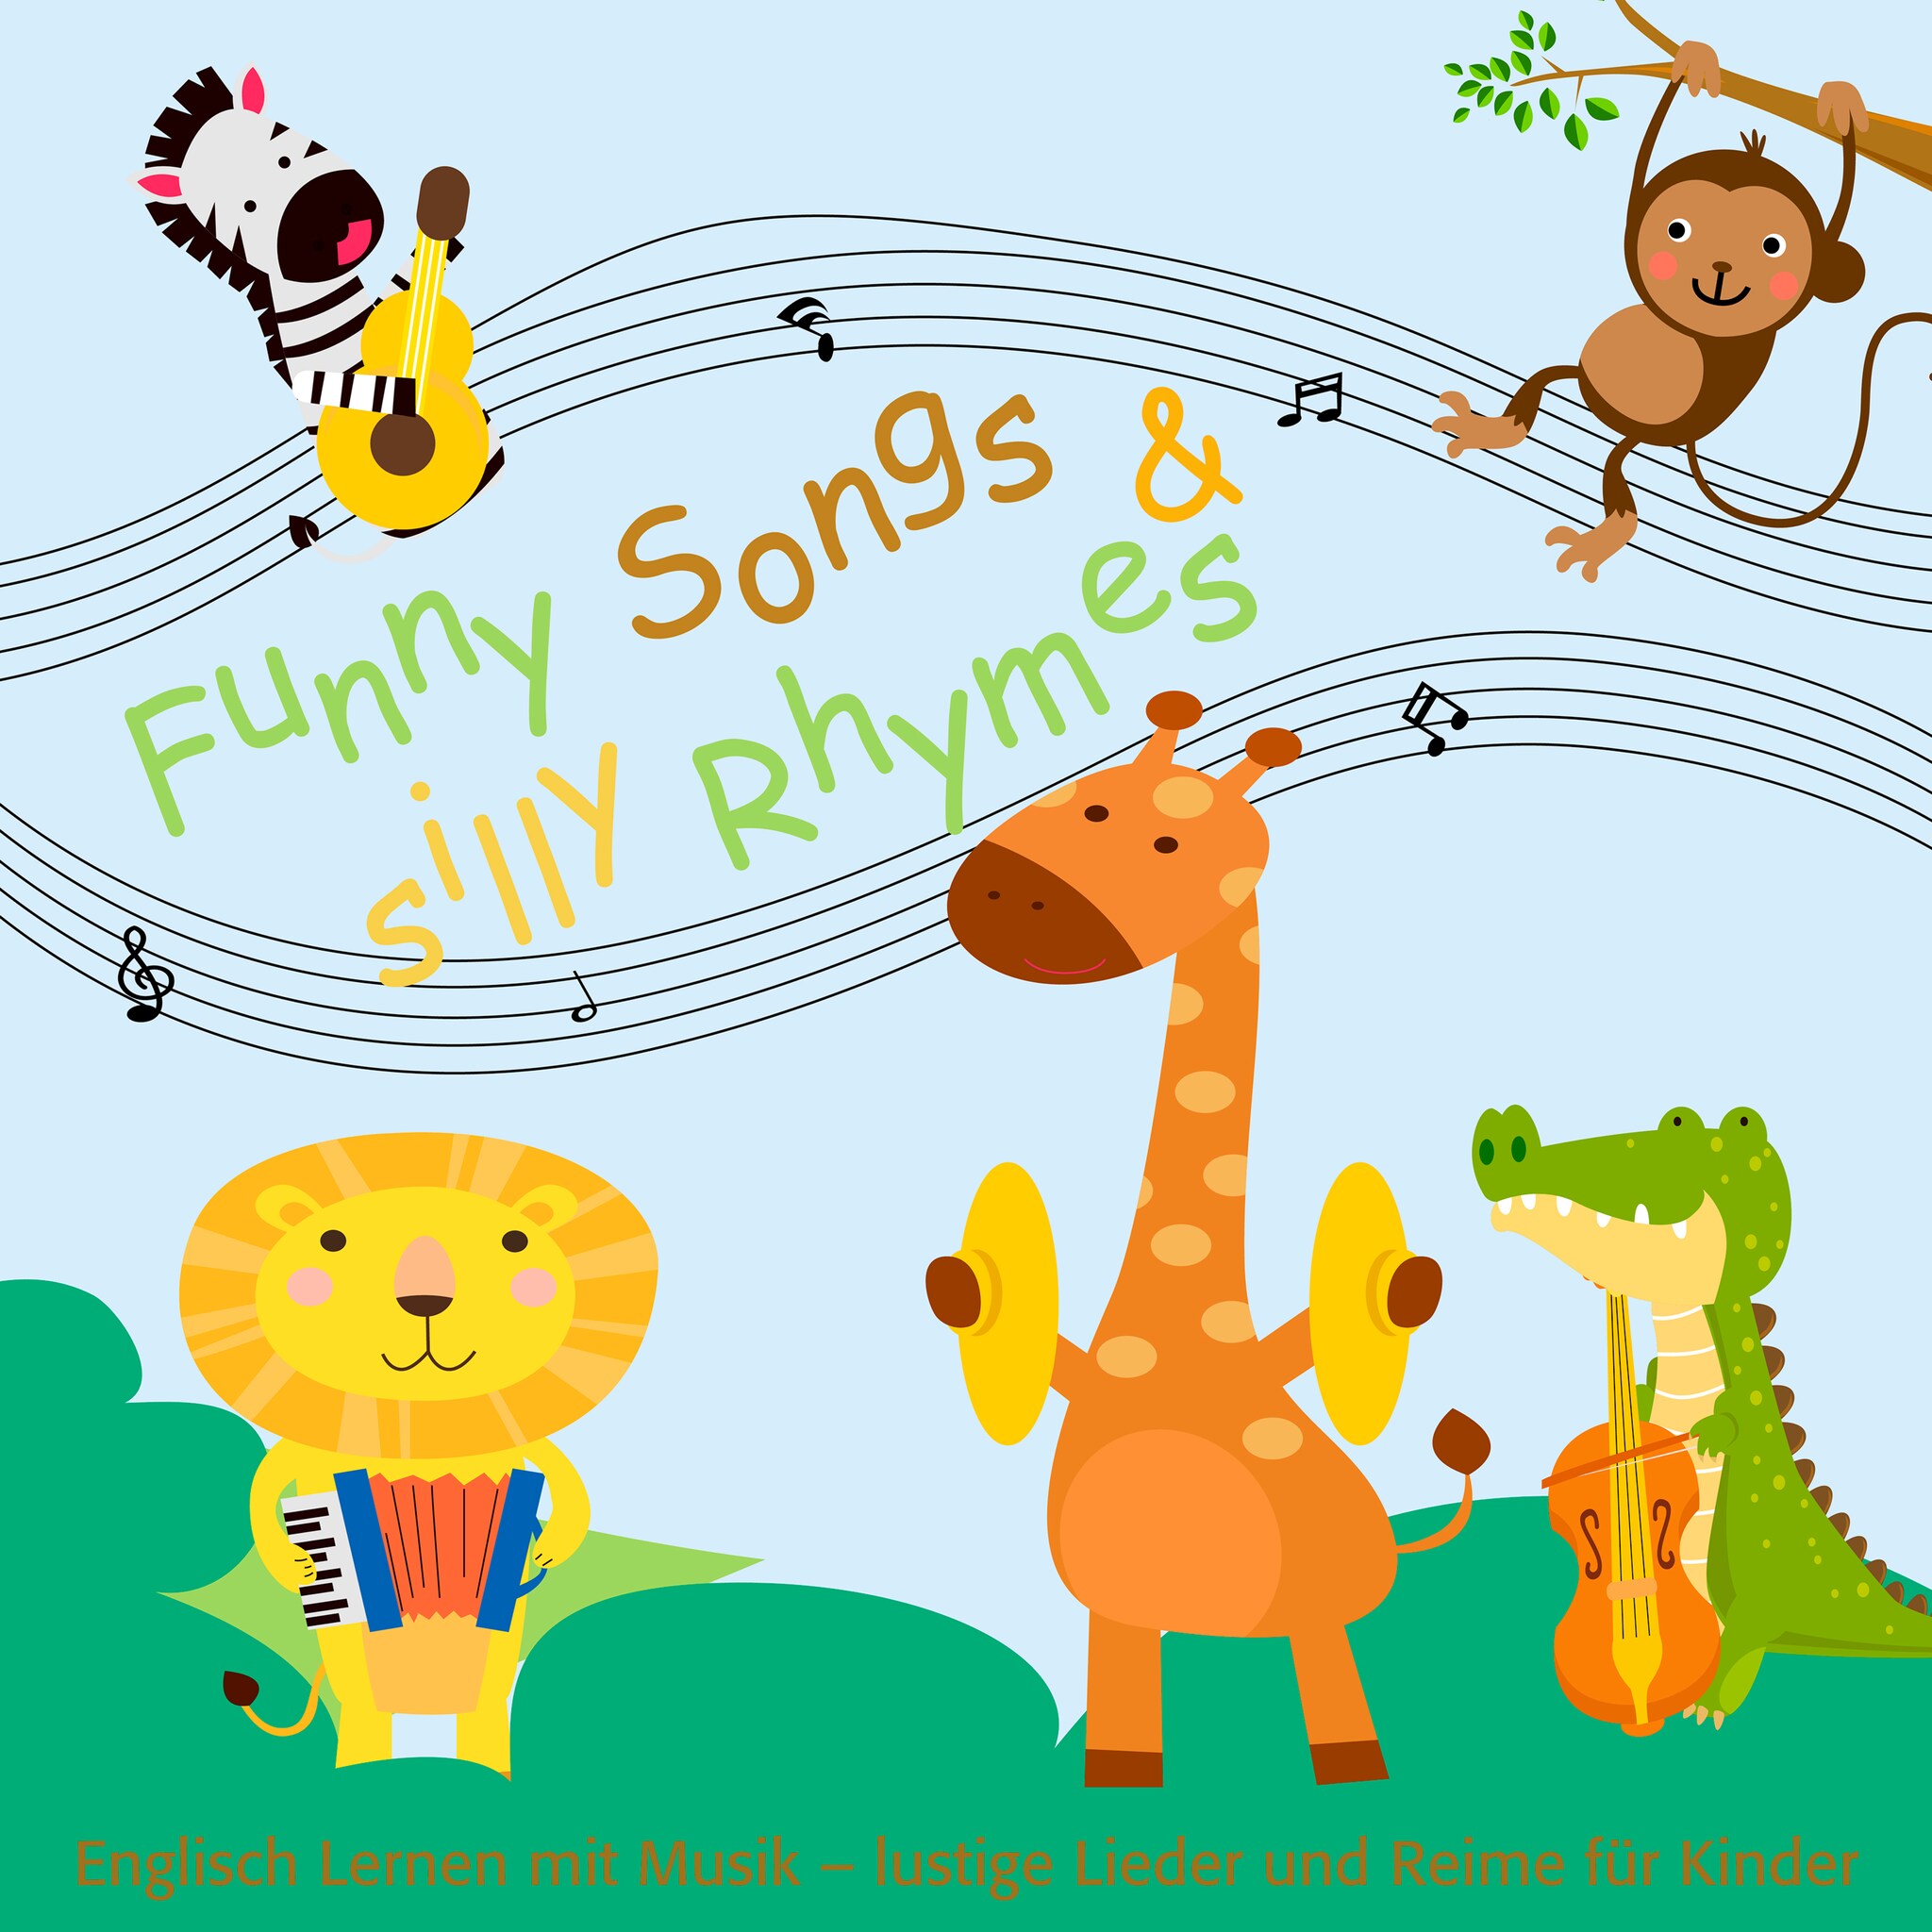 Funny Songs and silly Rhymes ilmaiseksi